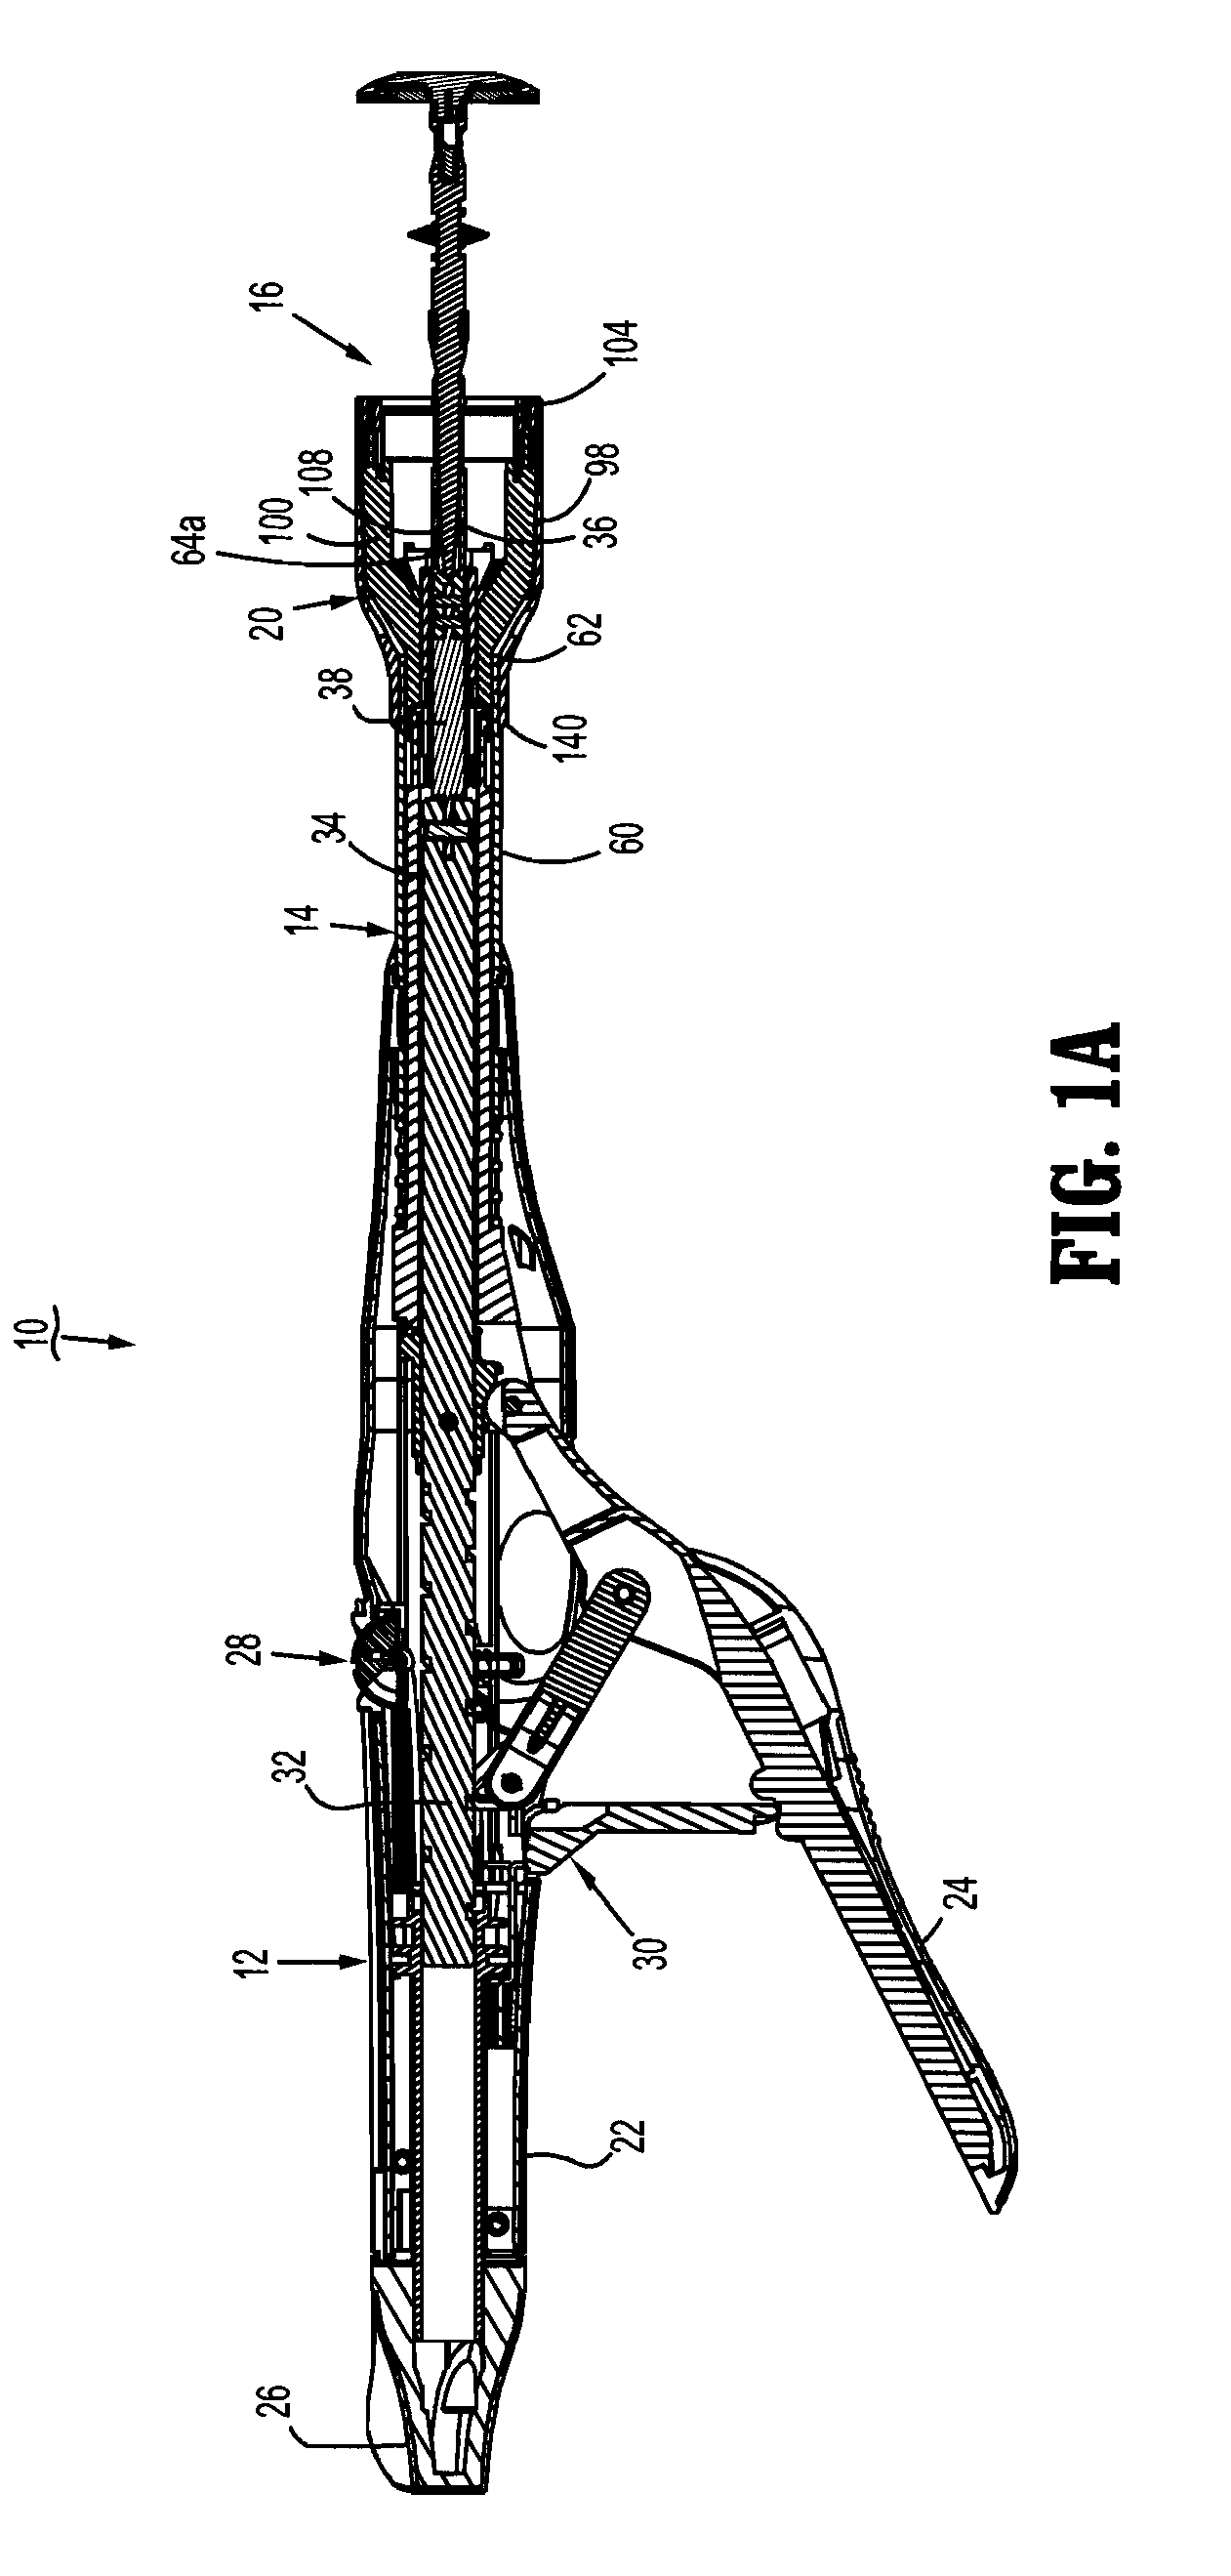 Surgical stapler with suture locator